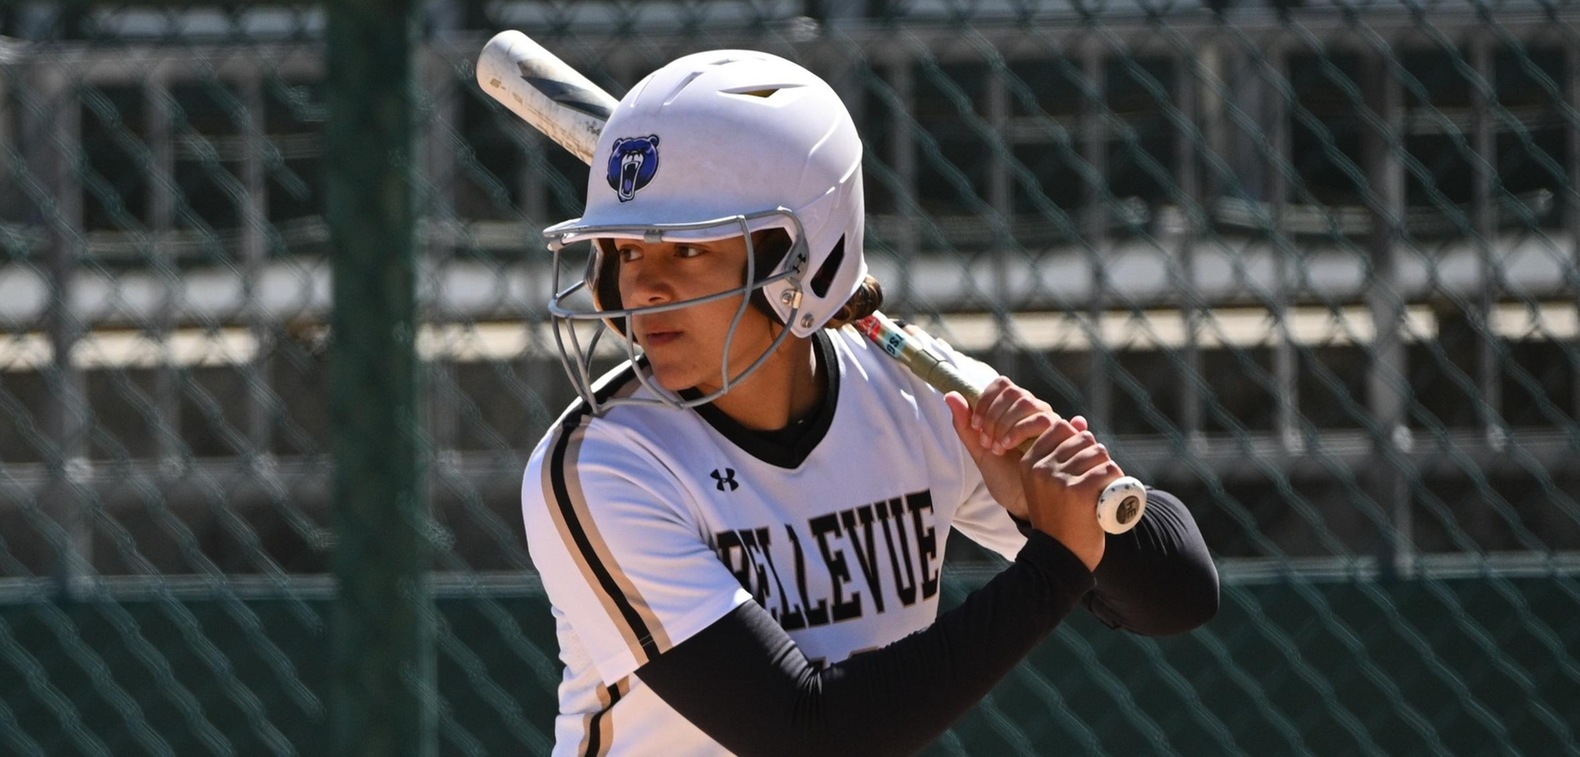 Liana McMurtry went 4-for-6 with two doubles, a home run, and seven RBIs on the day.